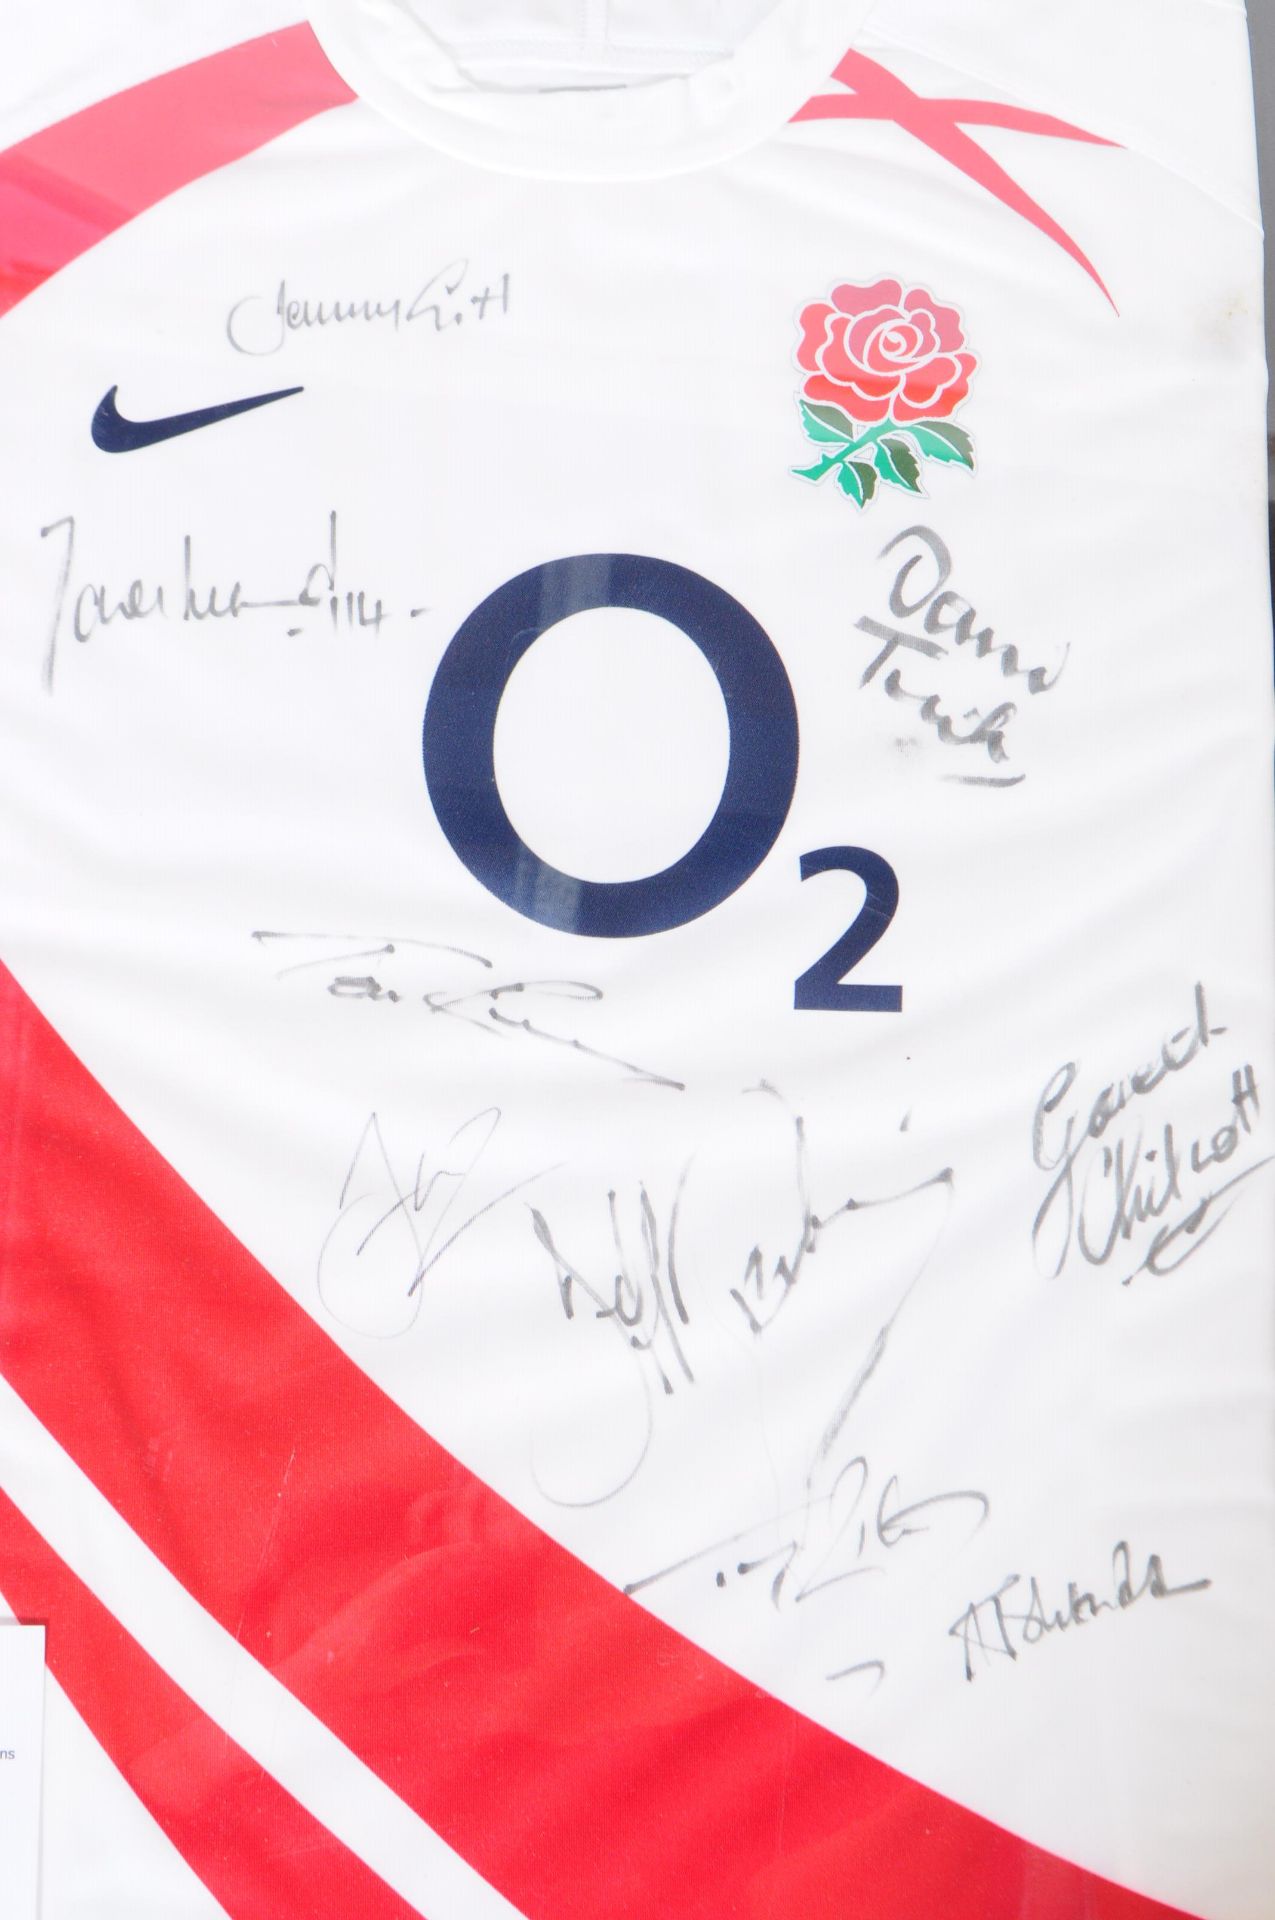 SPORTING INTEREST - SIGNED ENGLAND RUGBY SHIRT IN FRAME - Image 2 of 3